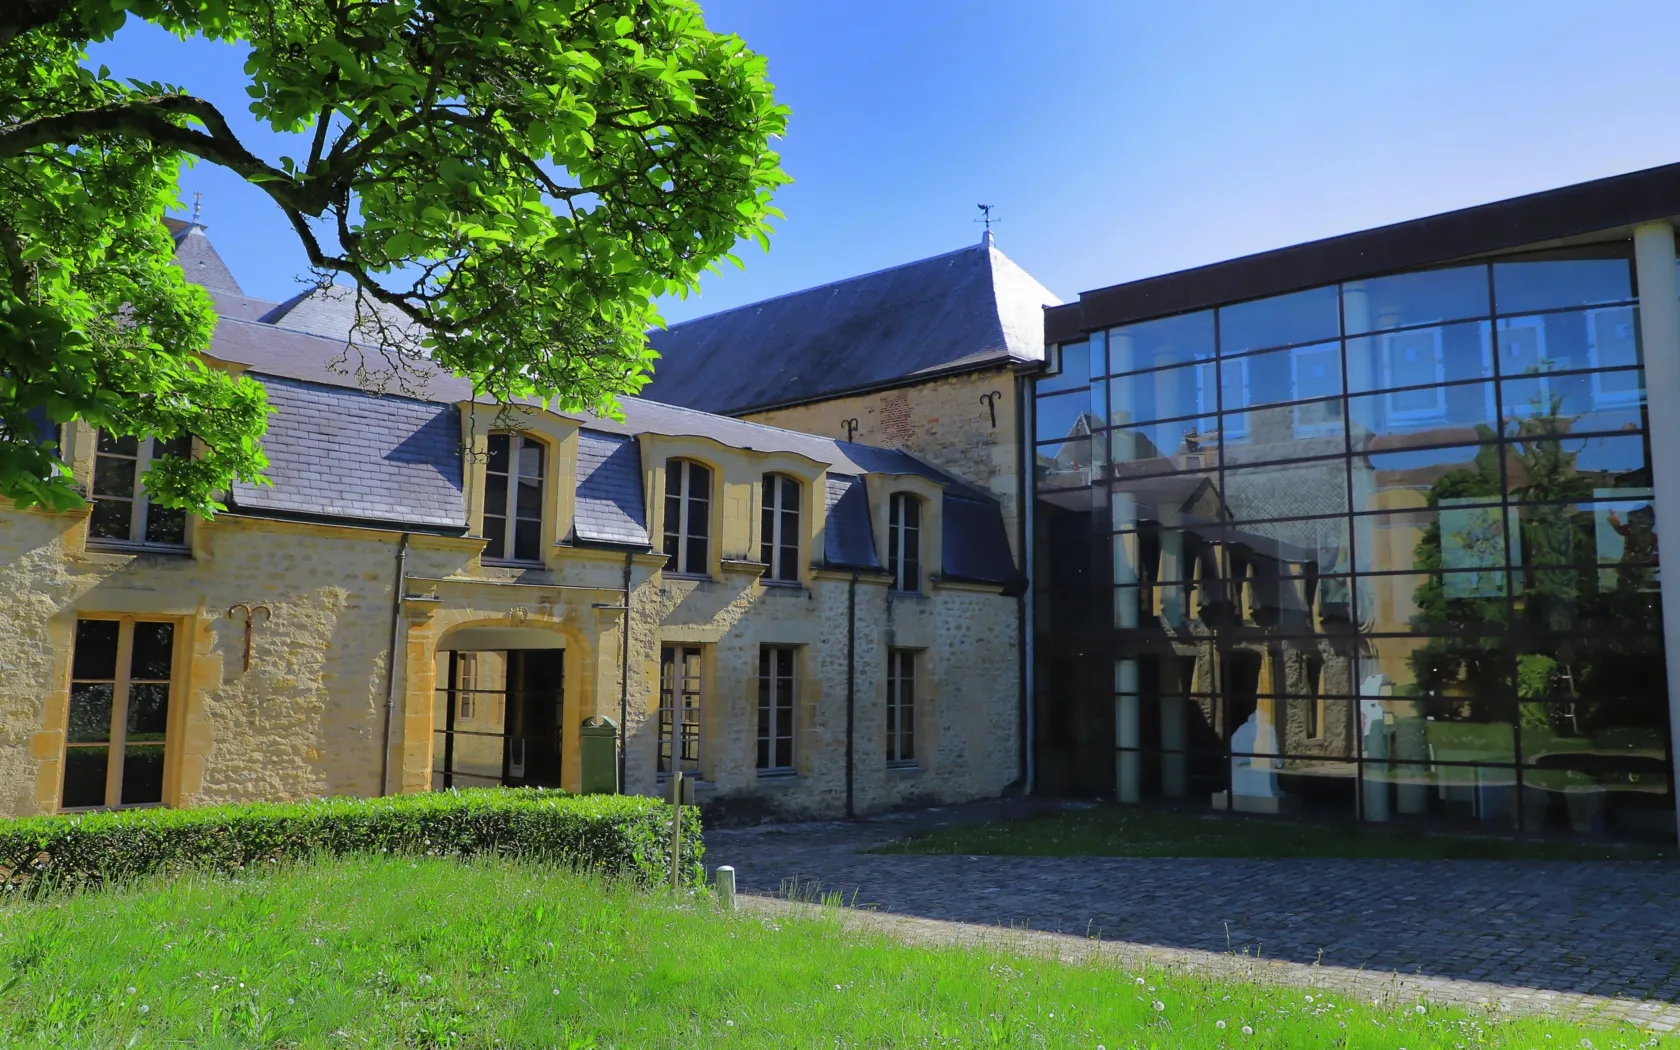 MUSEE RIMBAUD MUSEE ARDENNE MUSEAR MUSEES CHARLEVILLE-MEZIERES